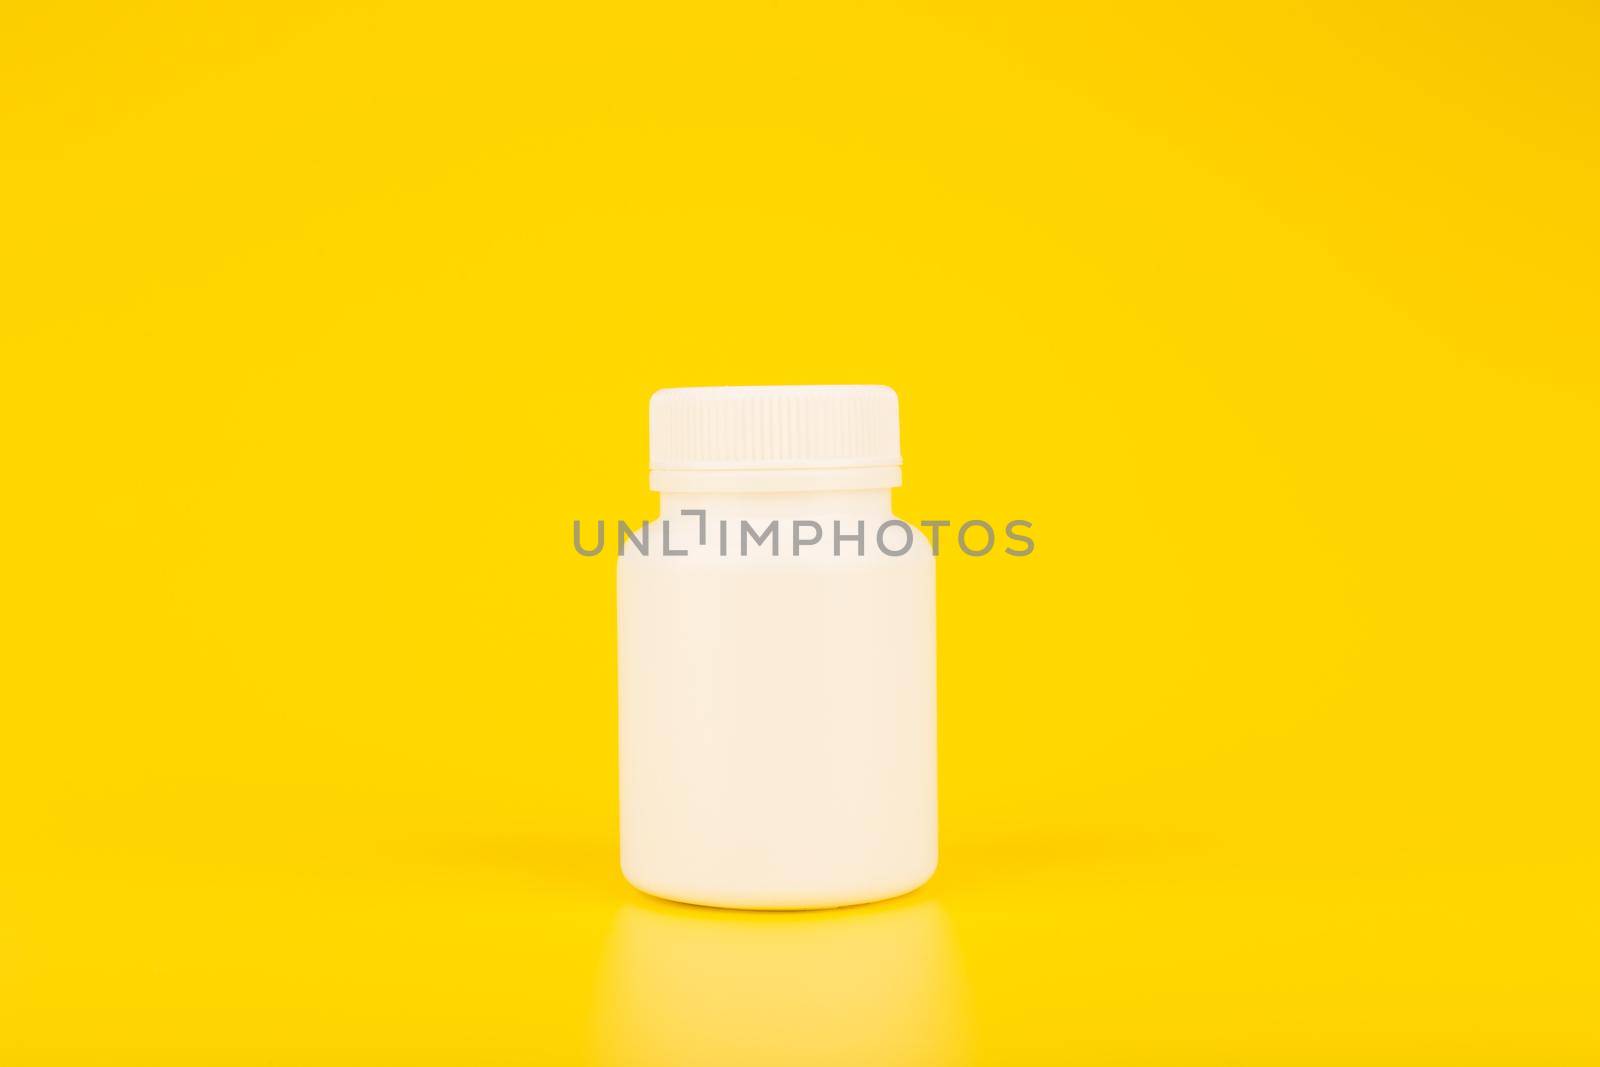 Minimalistic still life white plastic medication bottle against yellow background with copy space. Simple and creative concept of pharmacy, medical treatment or vitamins for kids. 